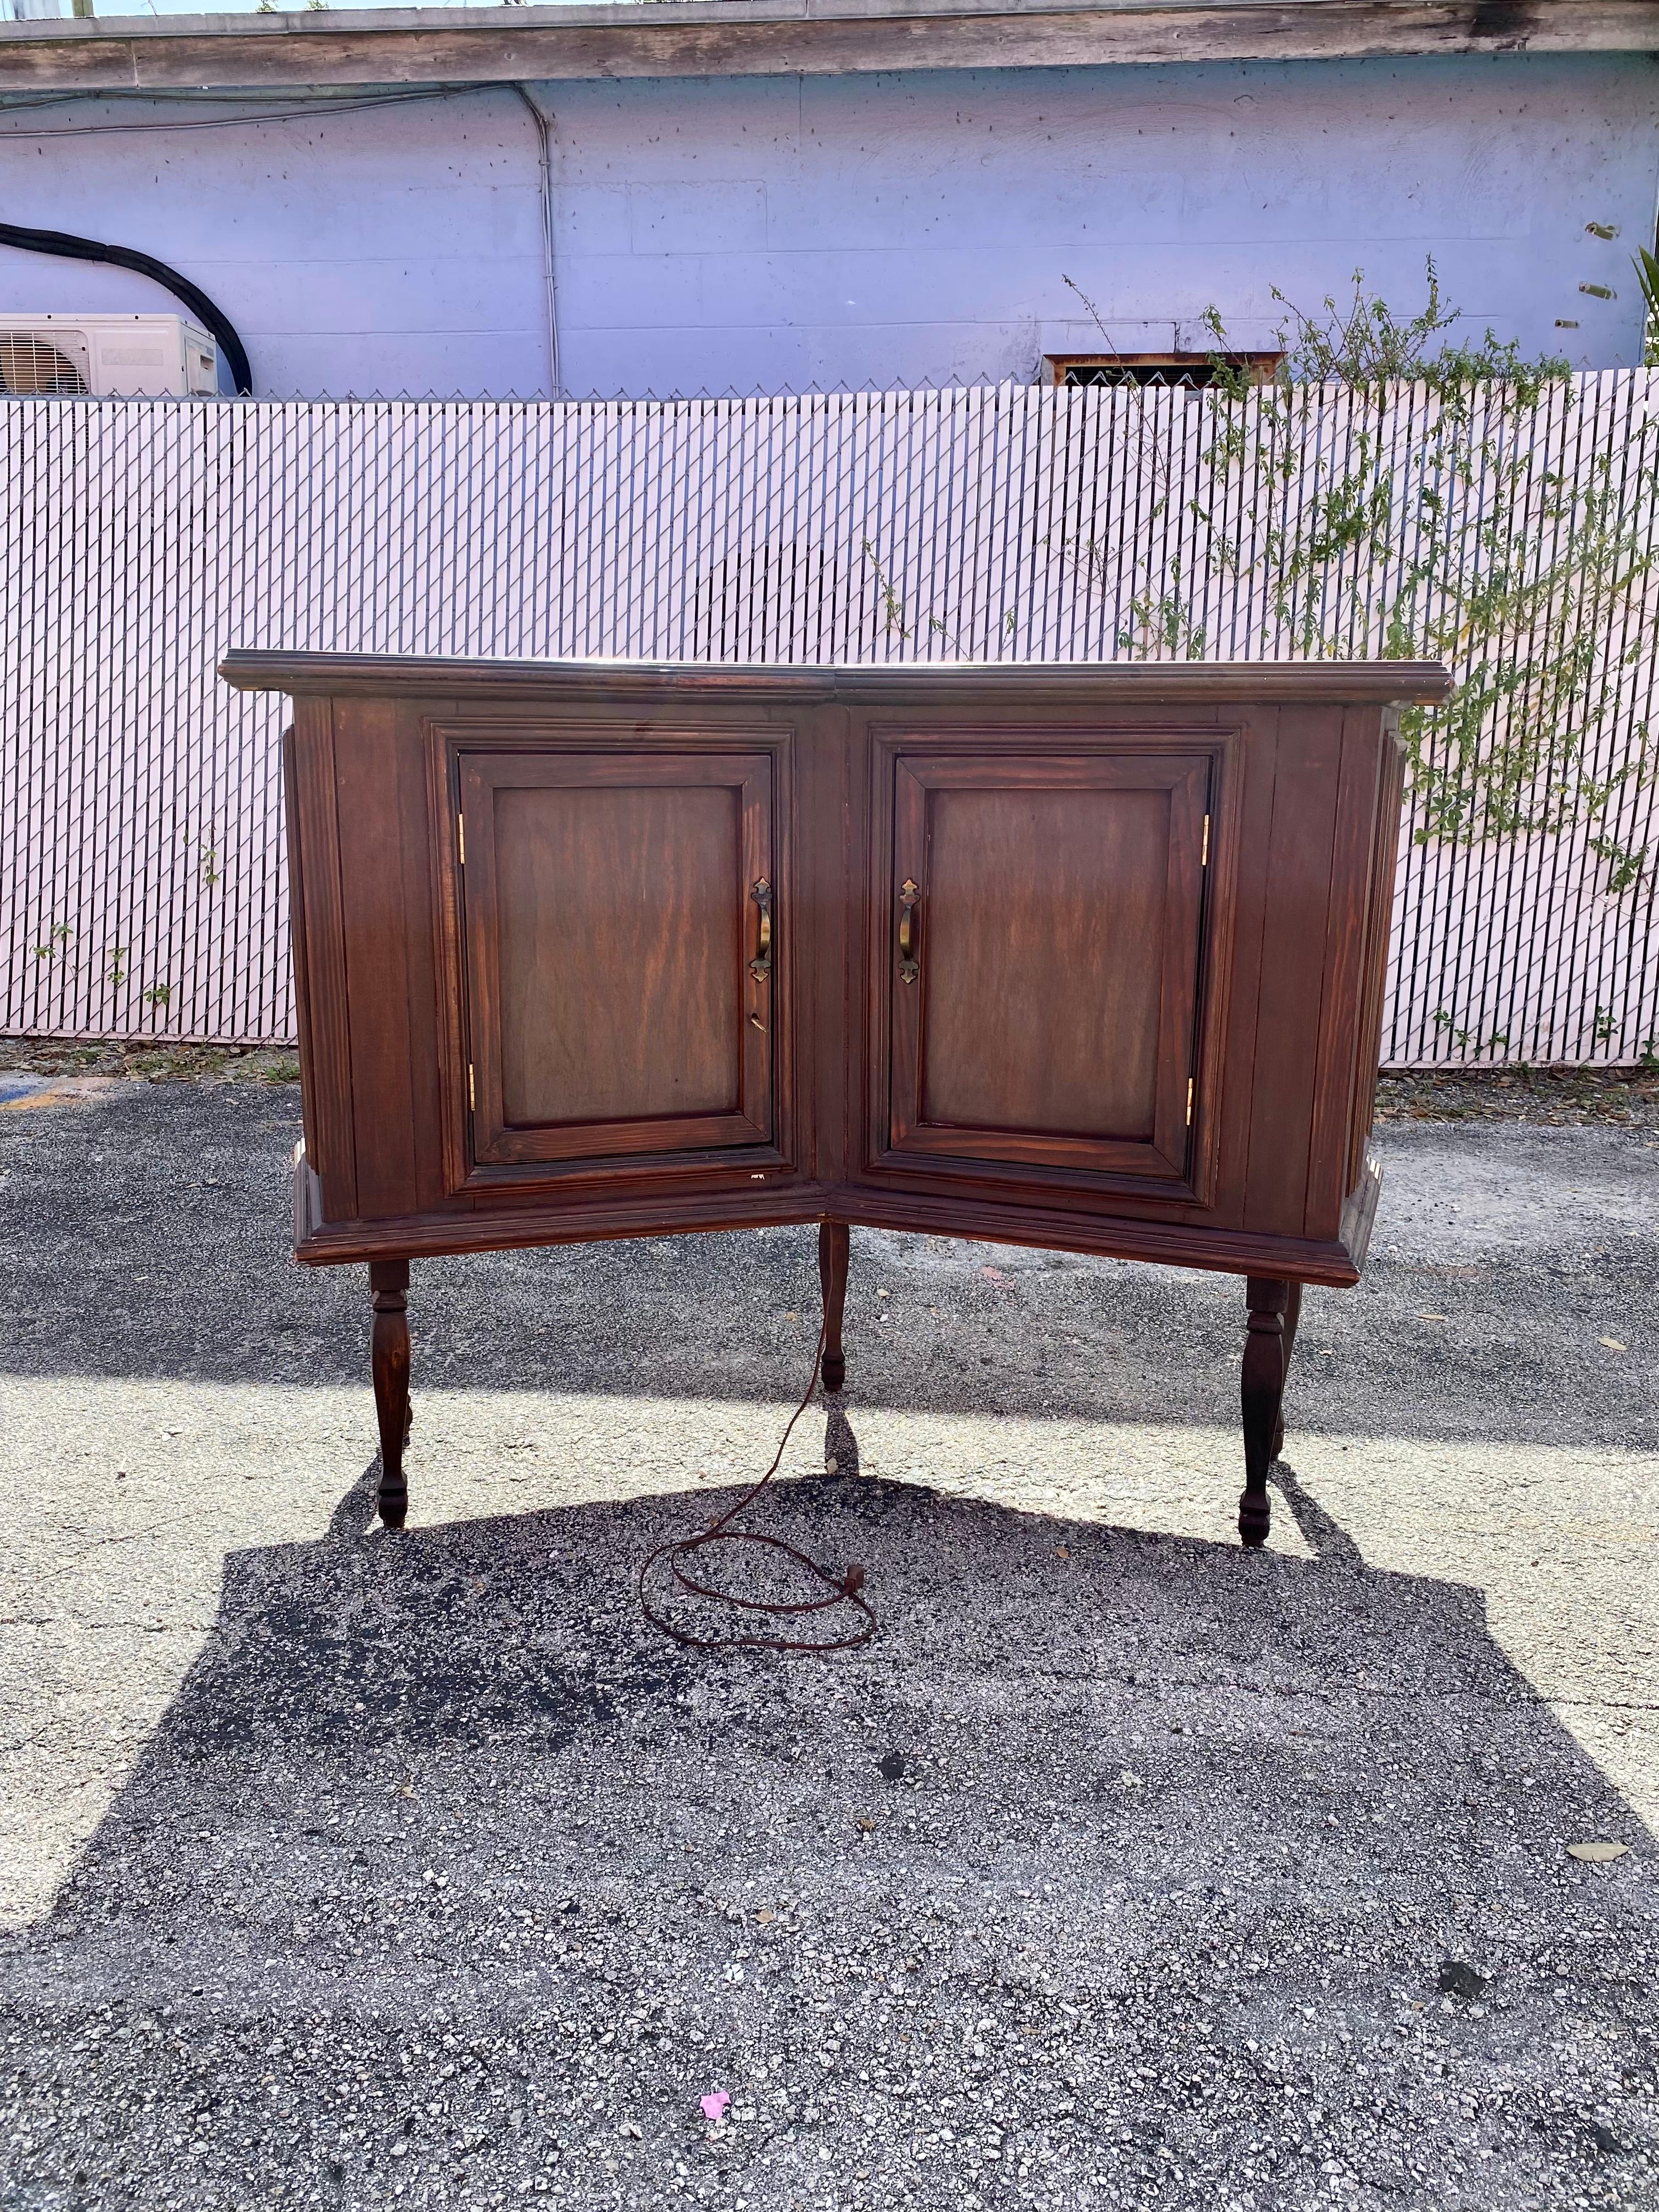 1940s Art Deco Angular Marble Tile Stained Glass Bar Cabinet Console For Sale 3